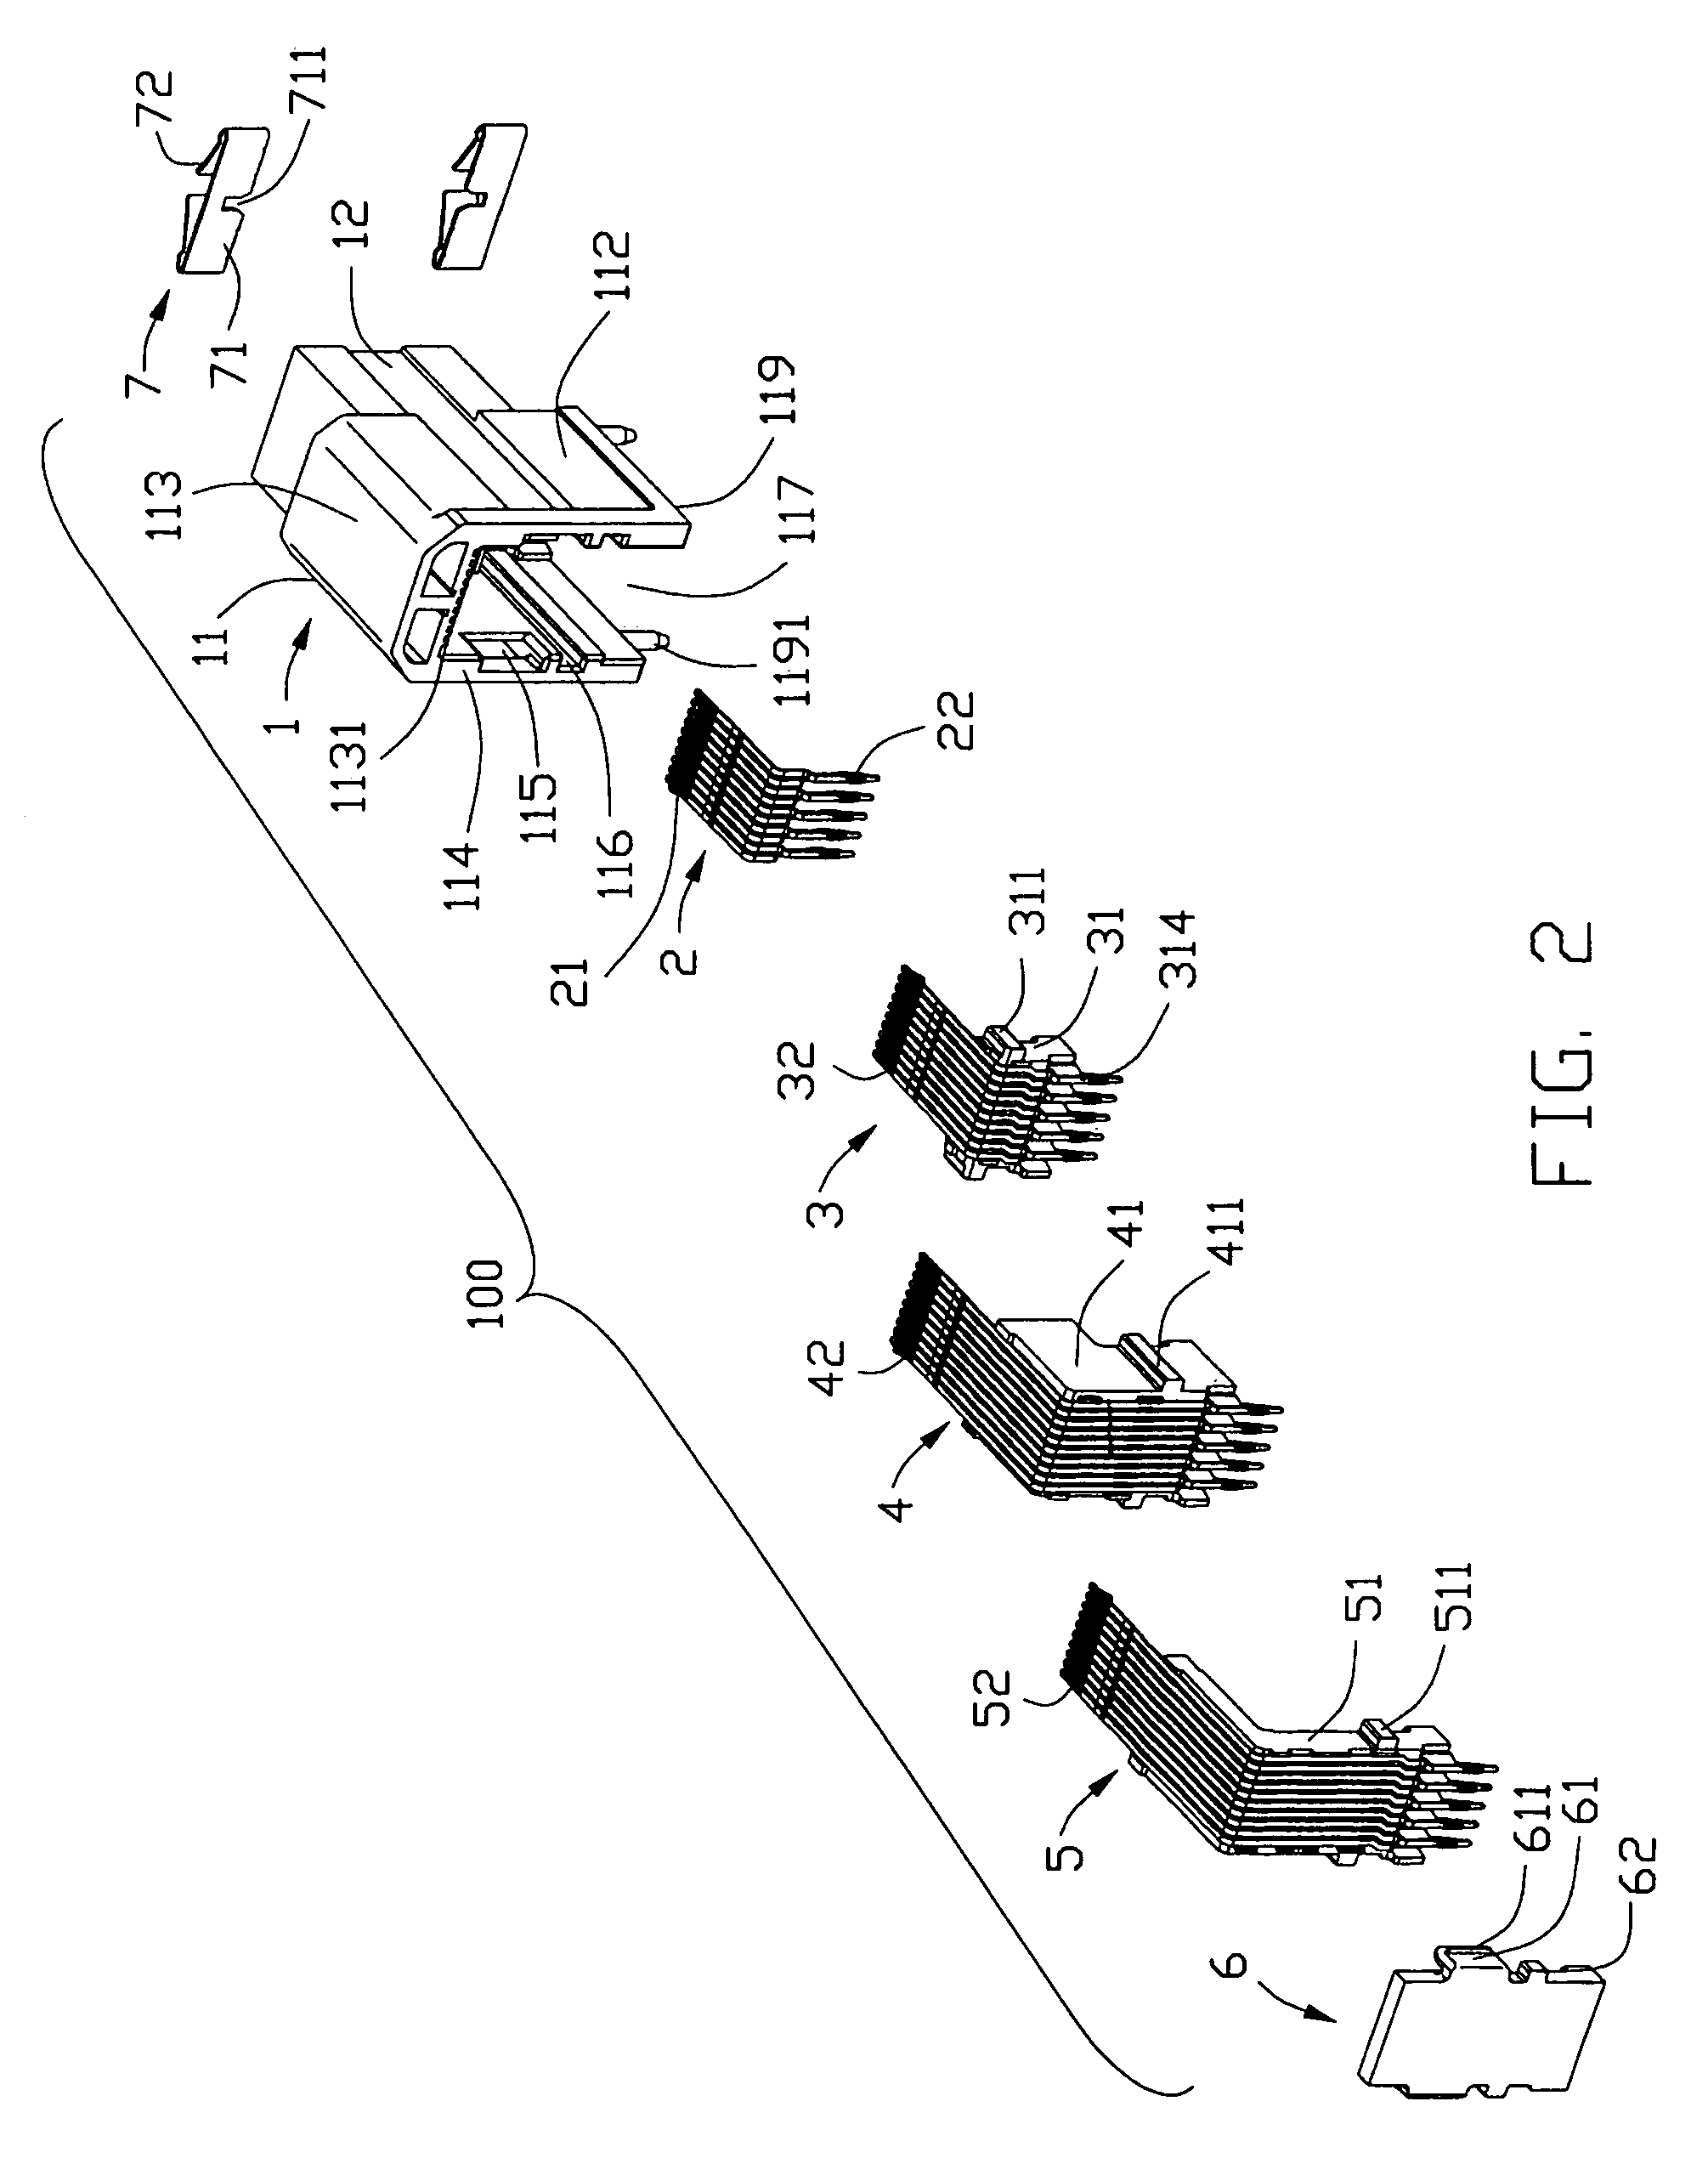 Pluggable connector with a high density structure